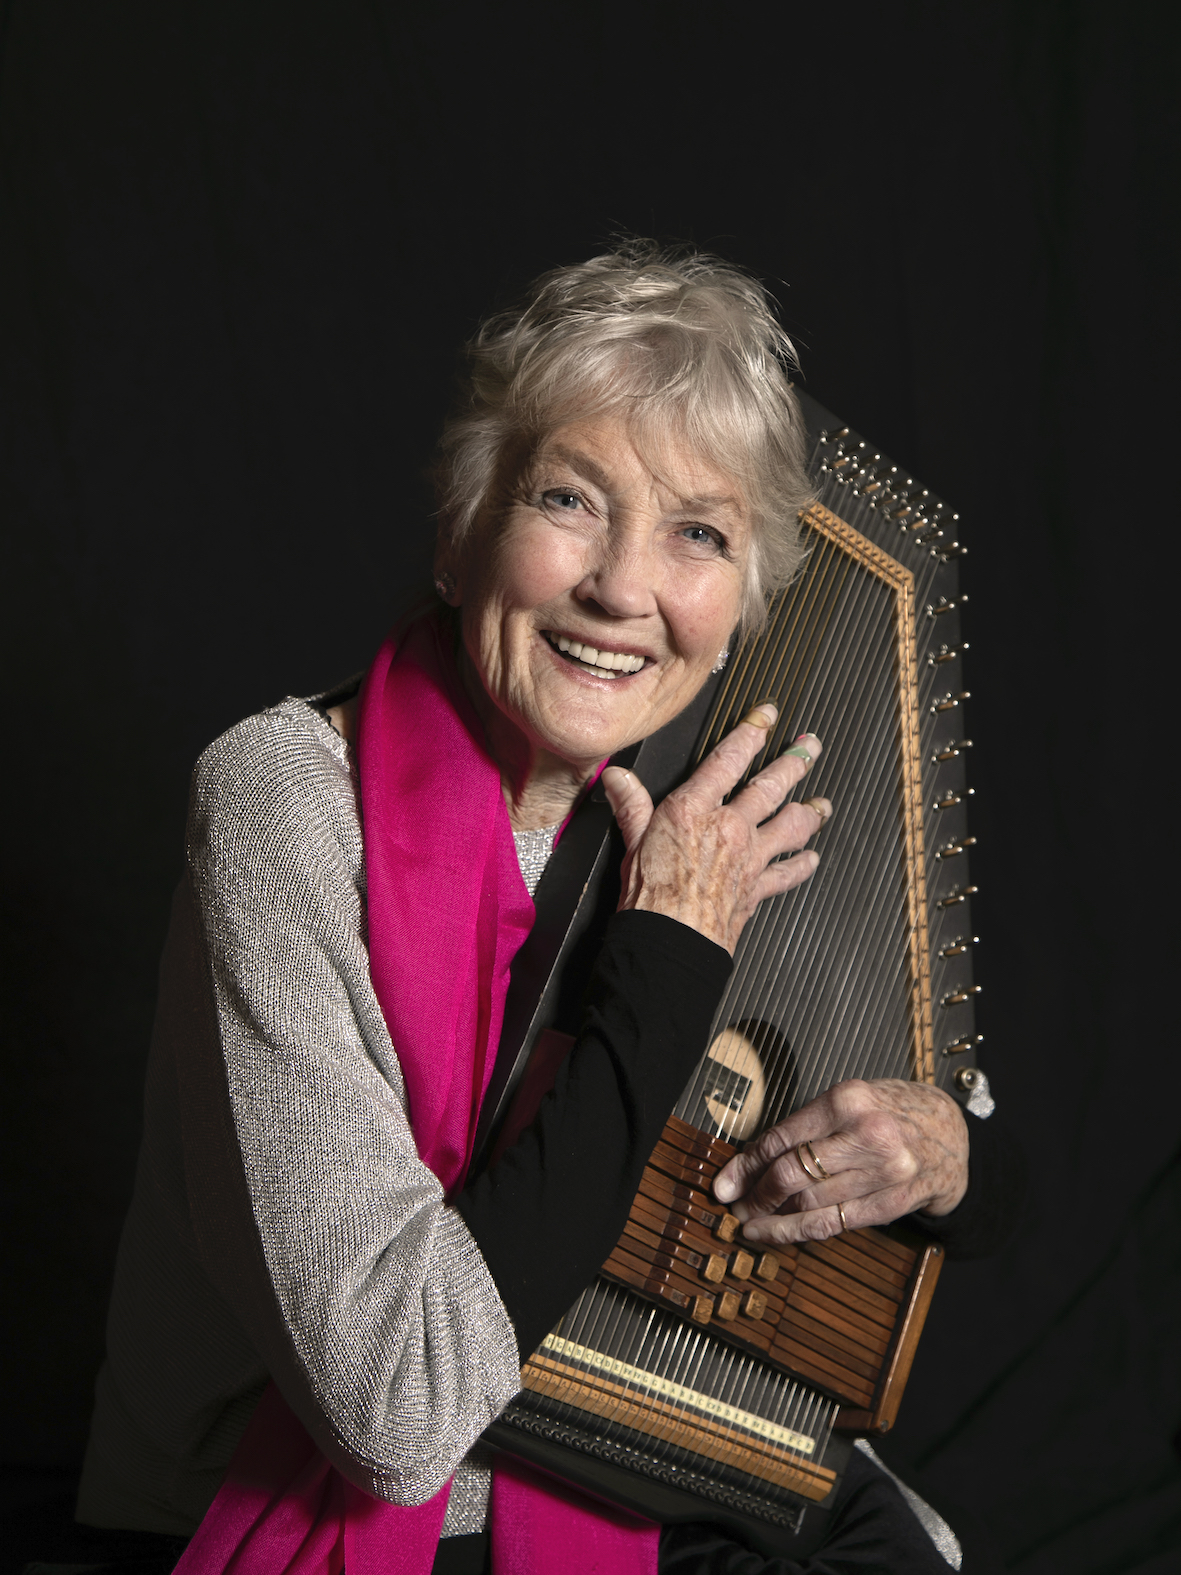 Peggy Seeger talking on a cell phone